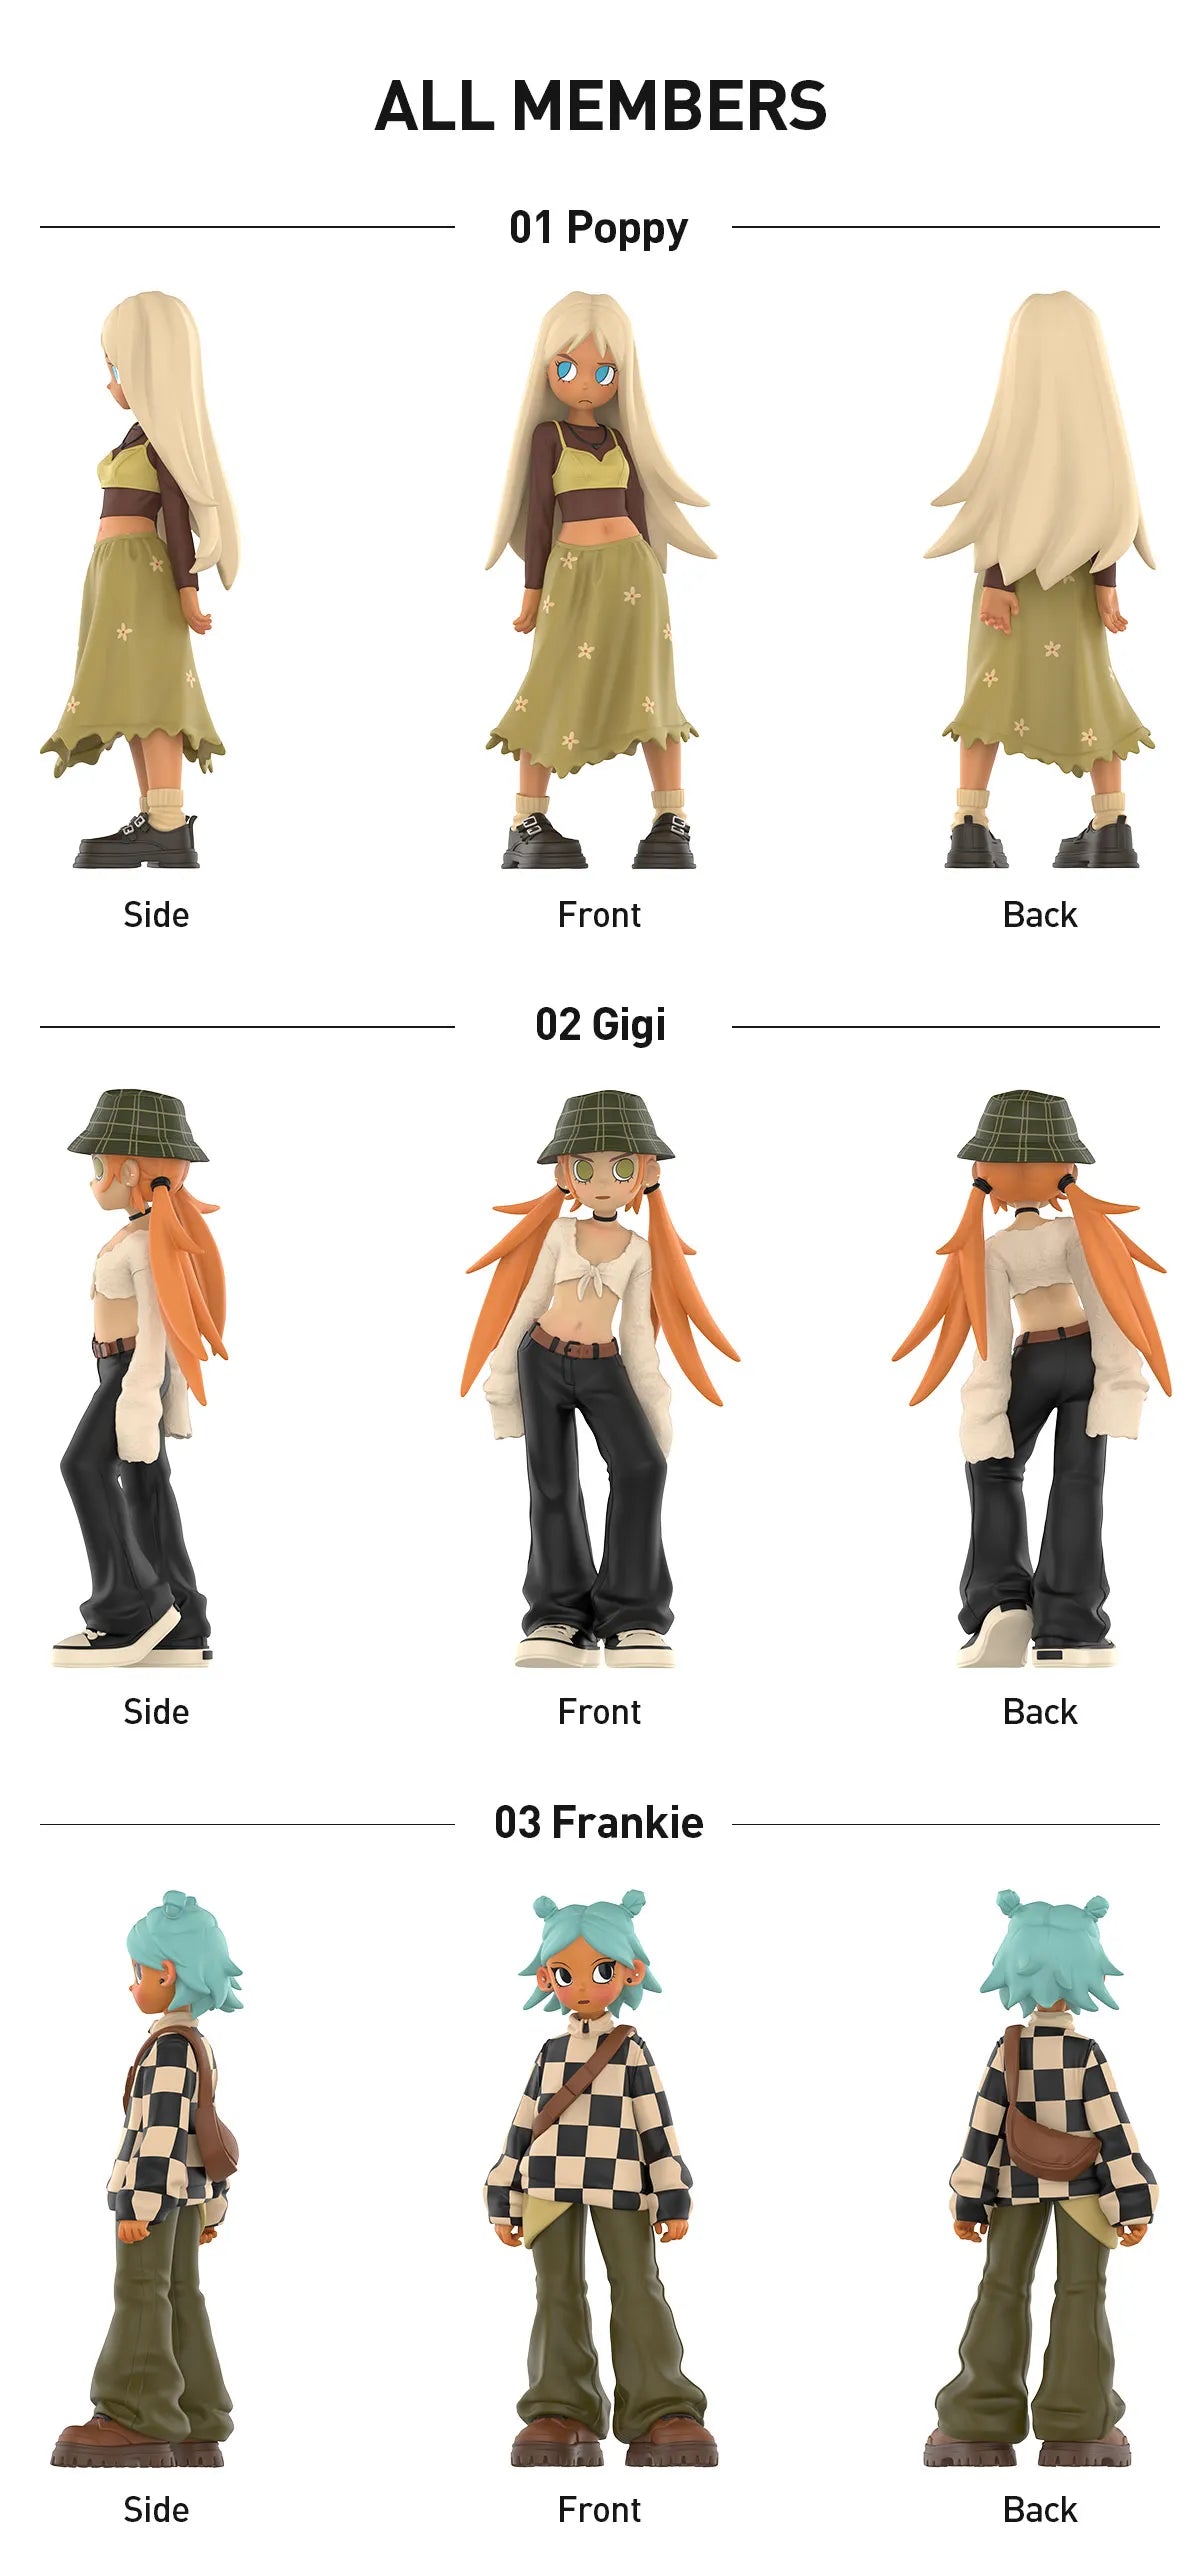 A blind box set of Peach Riot Street Style Figures, featuring cartoon characters in various poses and outfits. Made of ABS/PVC, each figure is 4.33 inches tall.